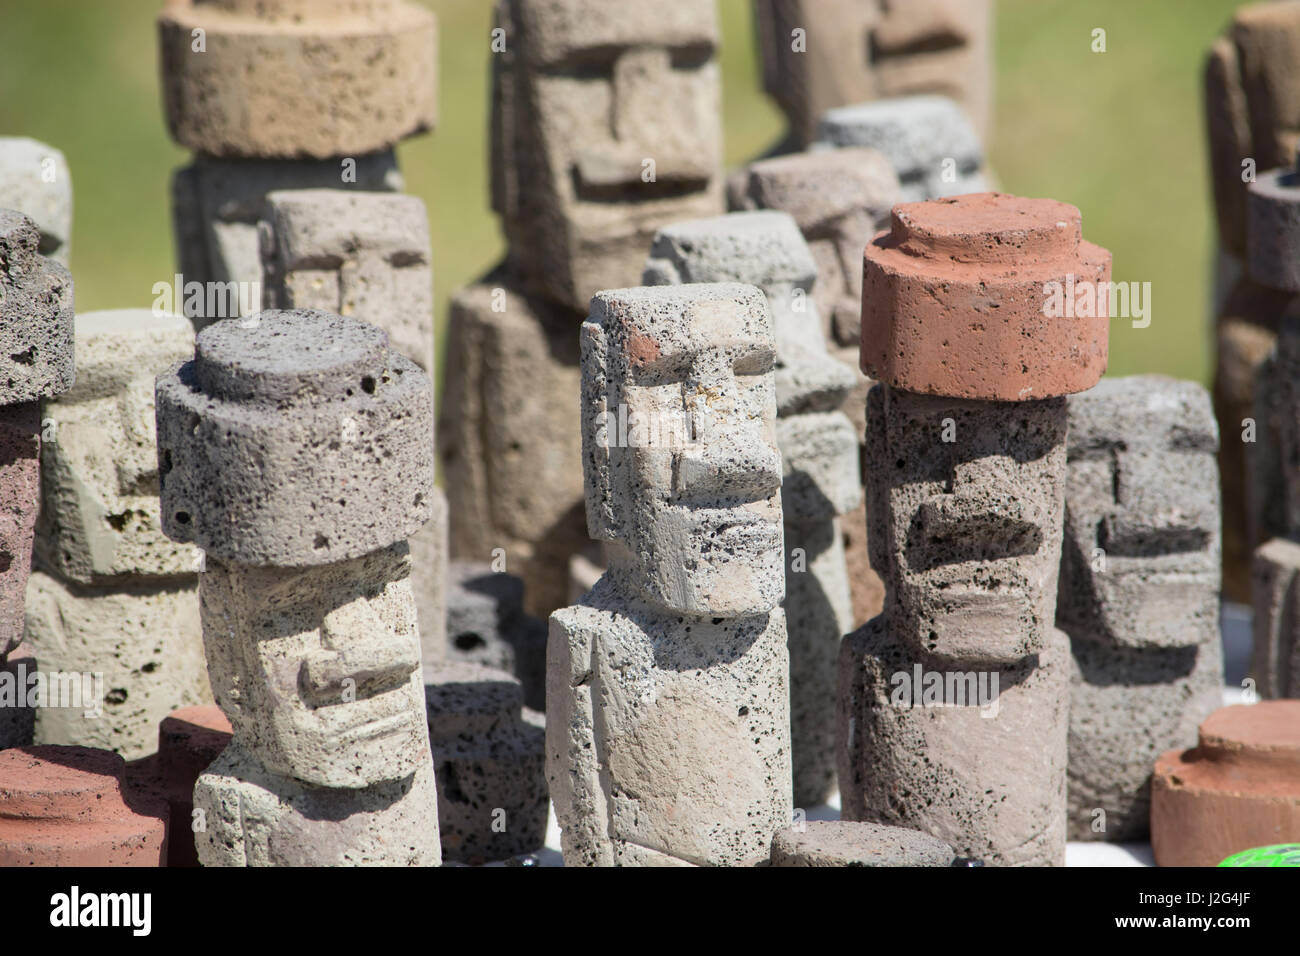 Chile, Easter Island aka Rapa Nui. Typical souvenir handicrafts for sale around the island. Carved volcanic stone moi figures. Stock Photo